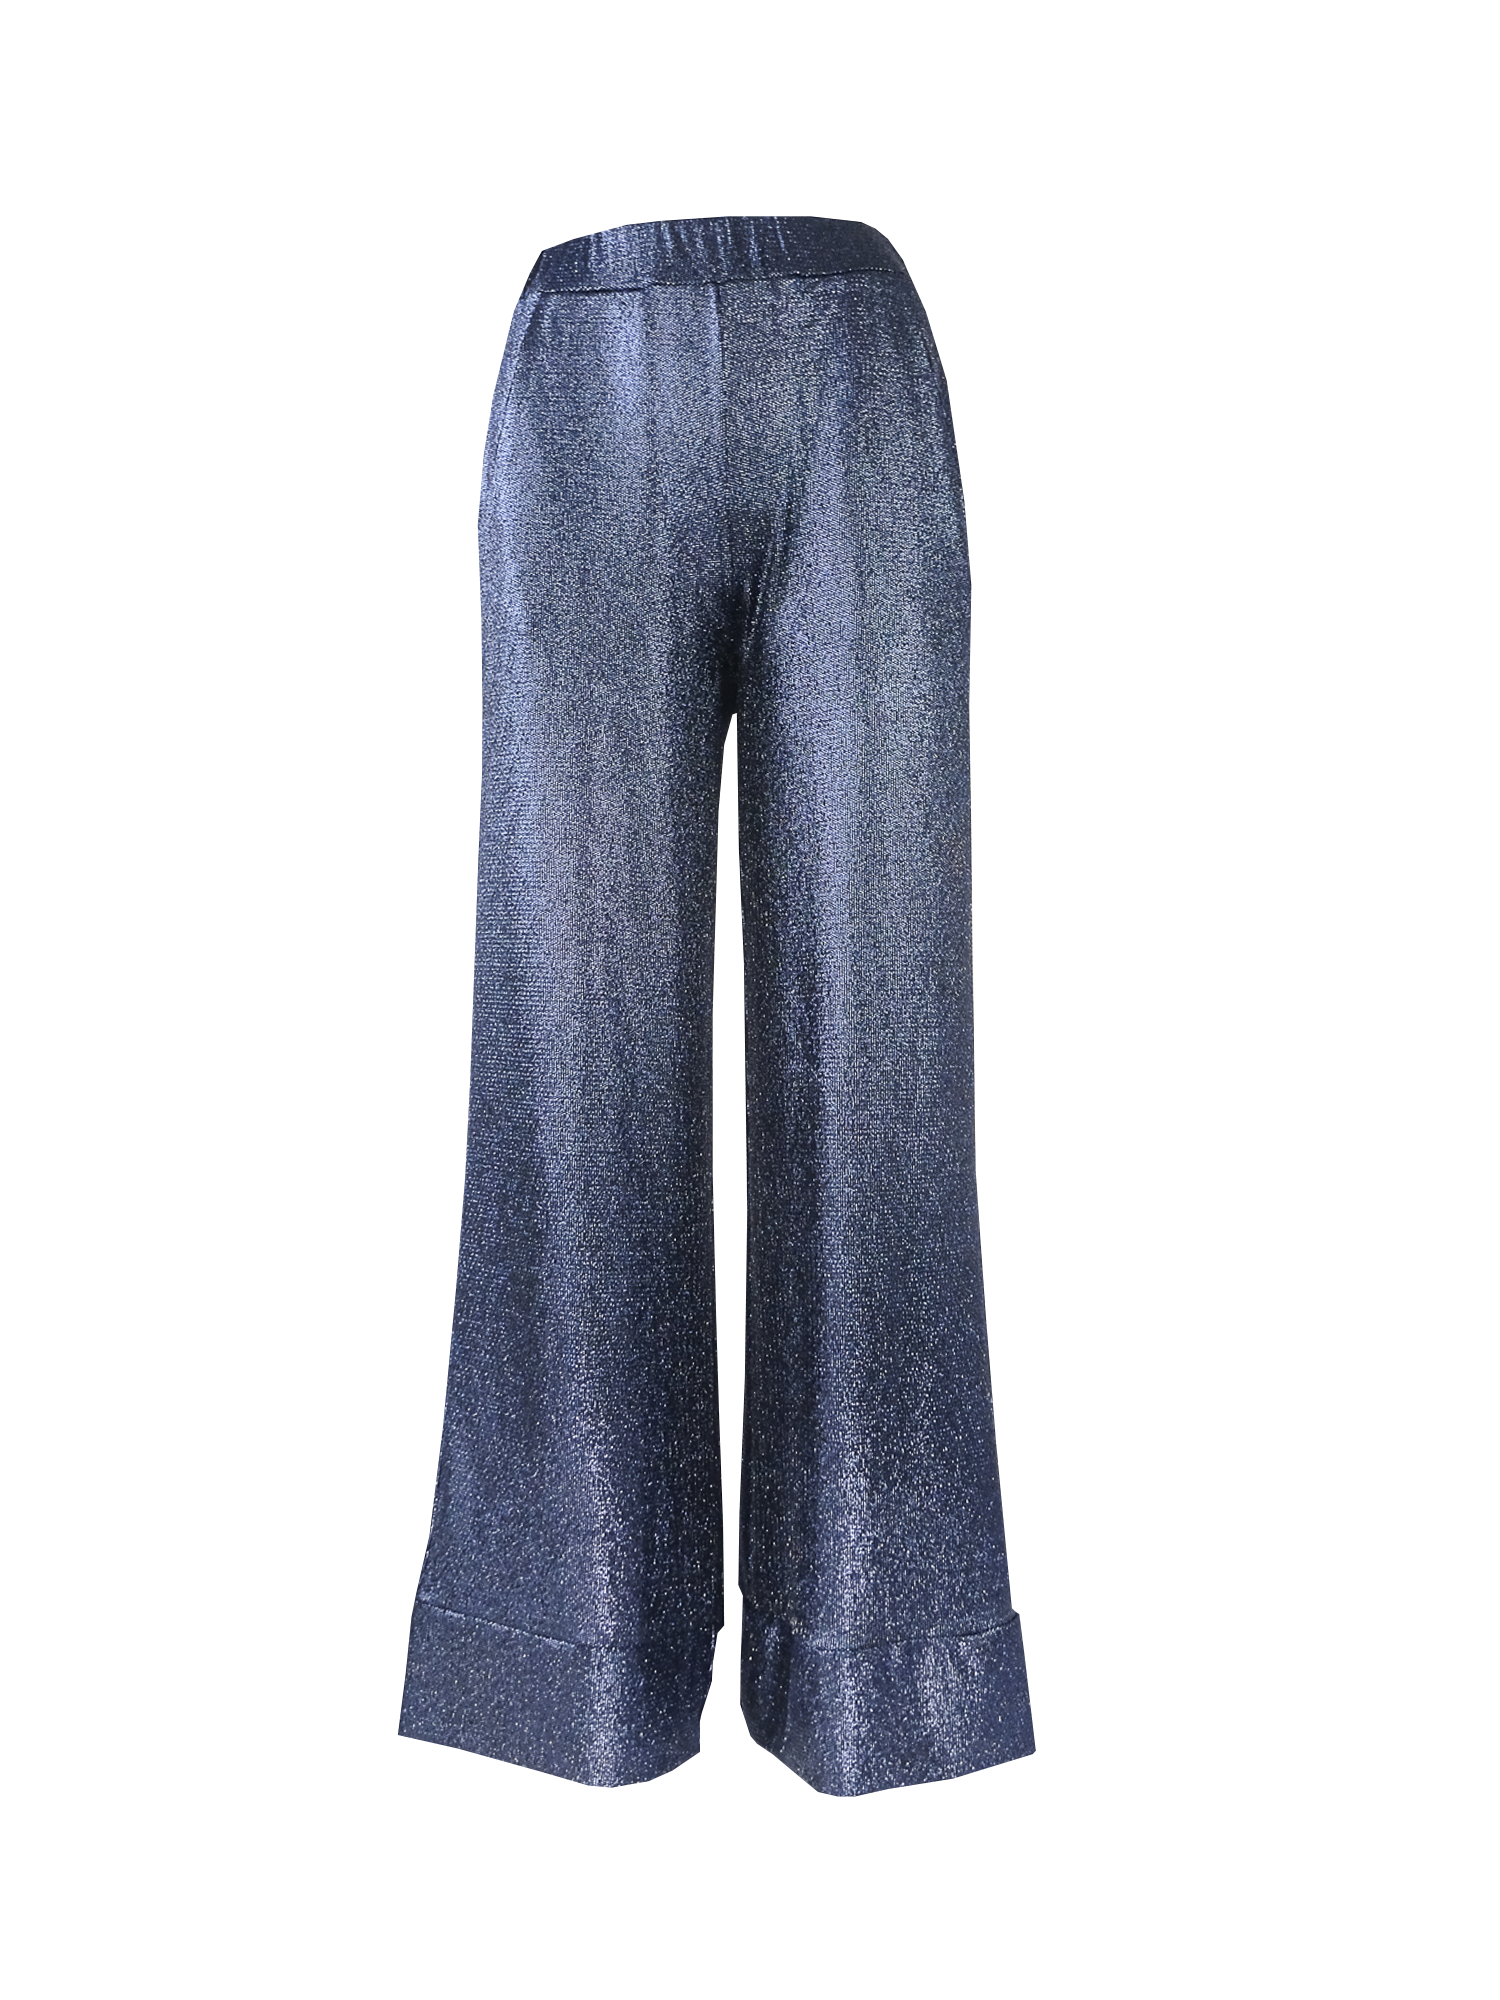 AIDA - palazzo trousers with side pockets in blue lurex